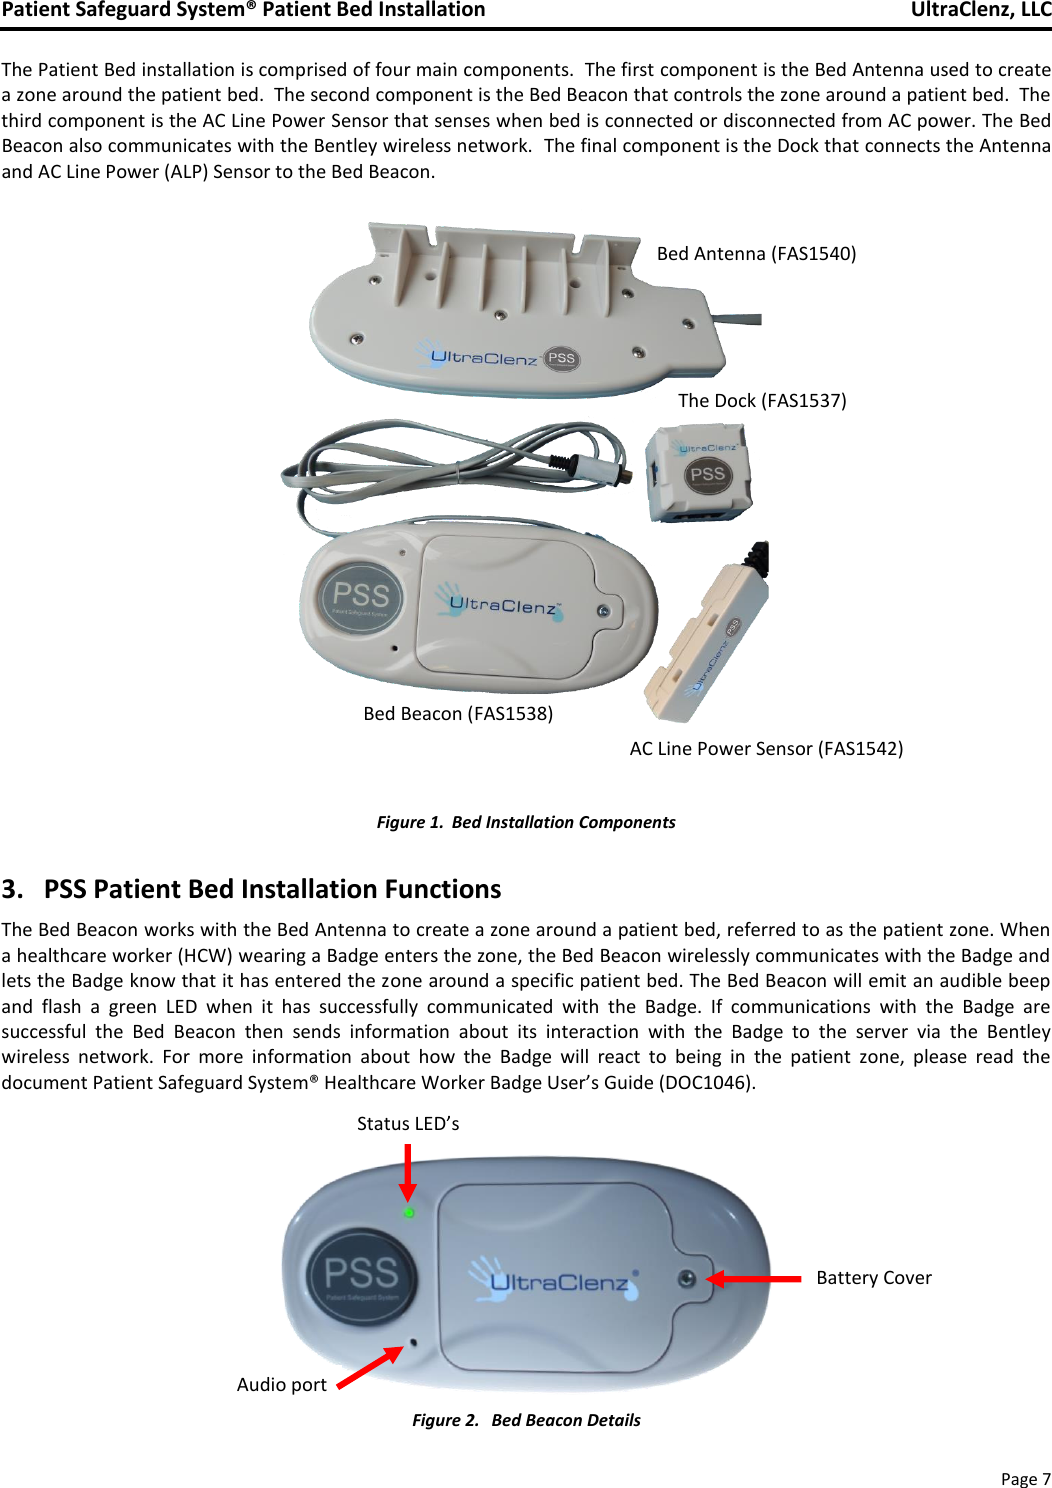 Patient Safeguard System® Patient Bed Installation   UltraClenz, LLC       Page 7  The Patient Bed installation is comprised of four main components.  The first component is the Bed Antenna used to create a zone around the patient bed.  The second component is the Bed Beacon that controls the zone around a patient bed.  The third component is the AC Line Power Sensor that senses when bed is connected or disconnected from AC power. The Bed Beacon also communicates with the Bentley wireless network.  The final component is the Dock that connects the Antenna and AC Line Power (ALP) Sensor to the Bed Beacon.                  Figure 1. Bed Installation Components  3.   PSS Patient Bed Installation Functions  The Bed Beacon works with the Bed Antenna to create a zone around a patient bed, referred to as the patient zone. When a healthcare worker (HCW) wearing a Badge enters the zone, the Bed Beacon wirelessly communicates with the Badge and lets the Badge know that it has entered the zone around a specific patient bed. The Bed Beacon will emit an audible beep and  flash  a  green  LED  when  it  has  successfully  communicated  with  the  Badge.  If  communications  with  the  Badge  are successful  the  Bed  Beacon  then  sends  information  about  its  interaction  with  the  Badge  to  the  server  via  the  Bentley wireless  network.  For  more  information  about  how  the  Badge  will  react  to  being  in  the  patient  zone,  please  read  the document Patient Safeguard System® Healthcare Worker Badge User’s Guide (DOC1046).    Figure 2.  Bed Beacon Details Bed Antenna (FAS1540) The Dock (FAS1537) Status LED’s Audio port Battery Cover AC Line Power Sensor (FAS1542) Bed Beacon (FAS1538) AC Line Power Sensor (FAS1542) Bed Antenna (FAS1540) 